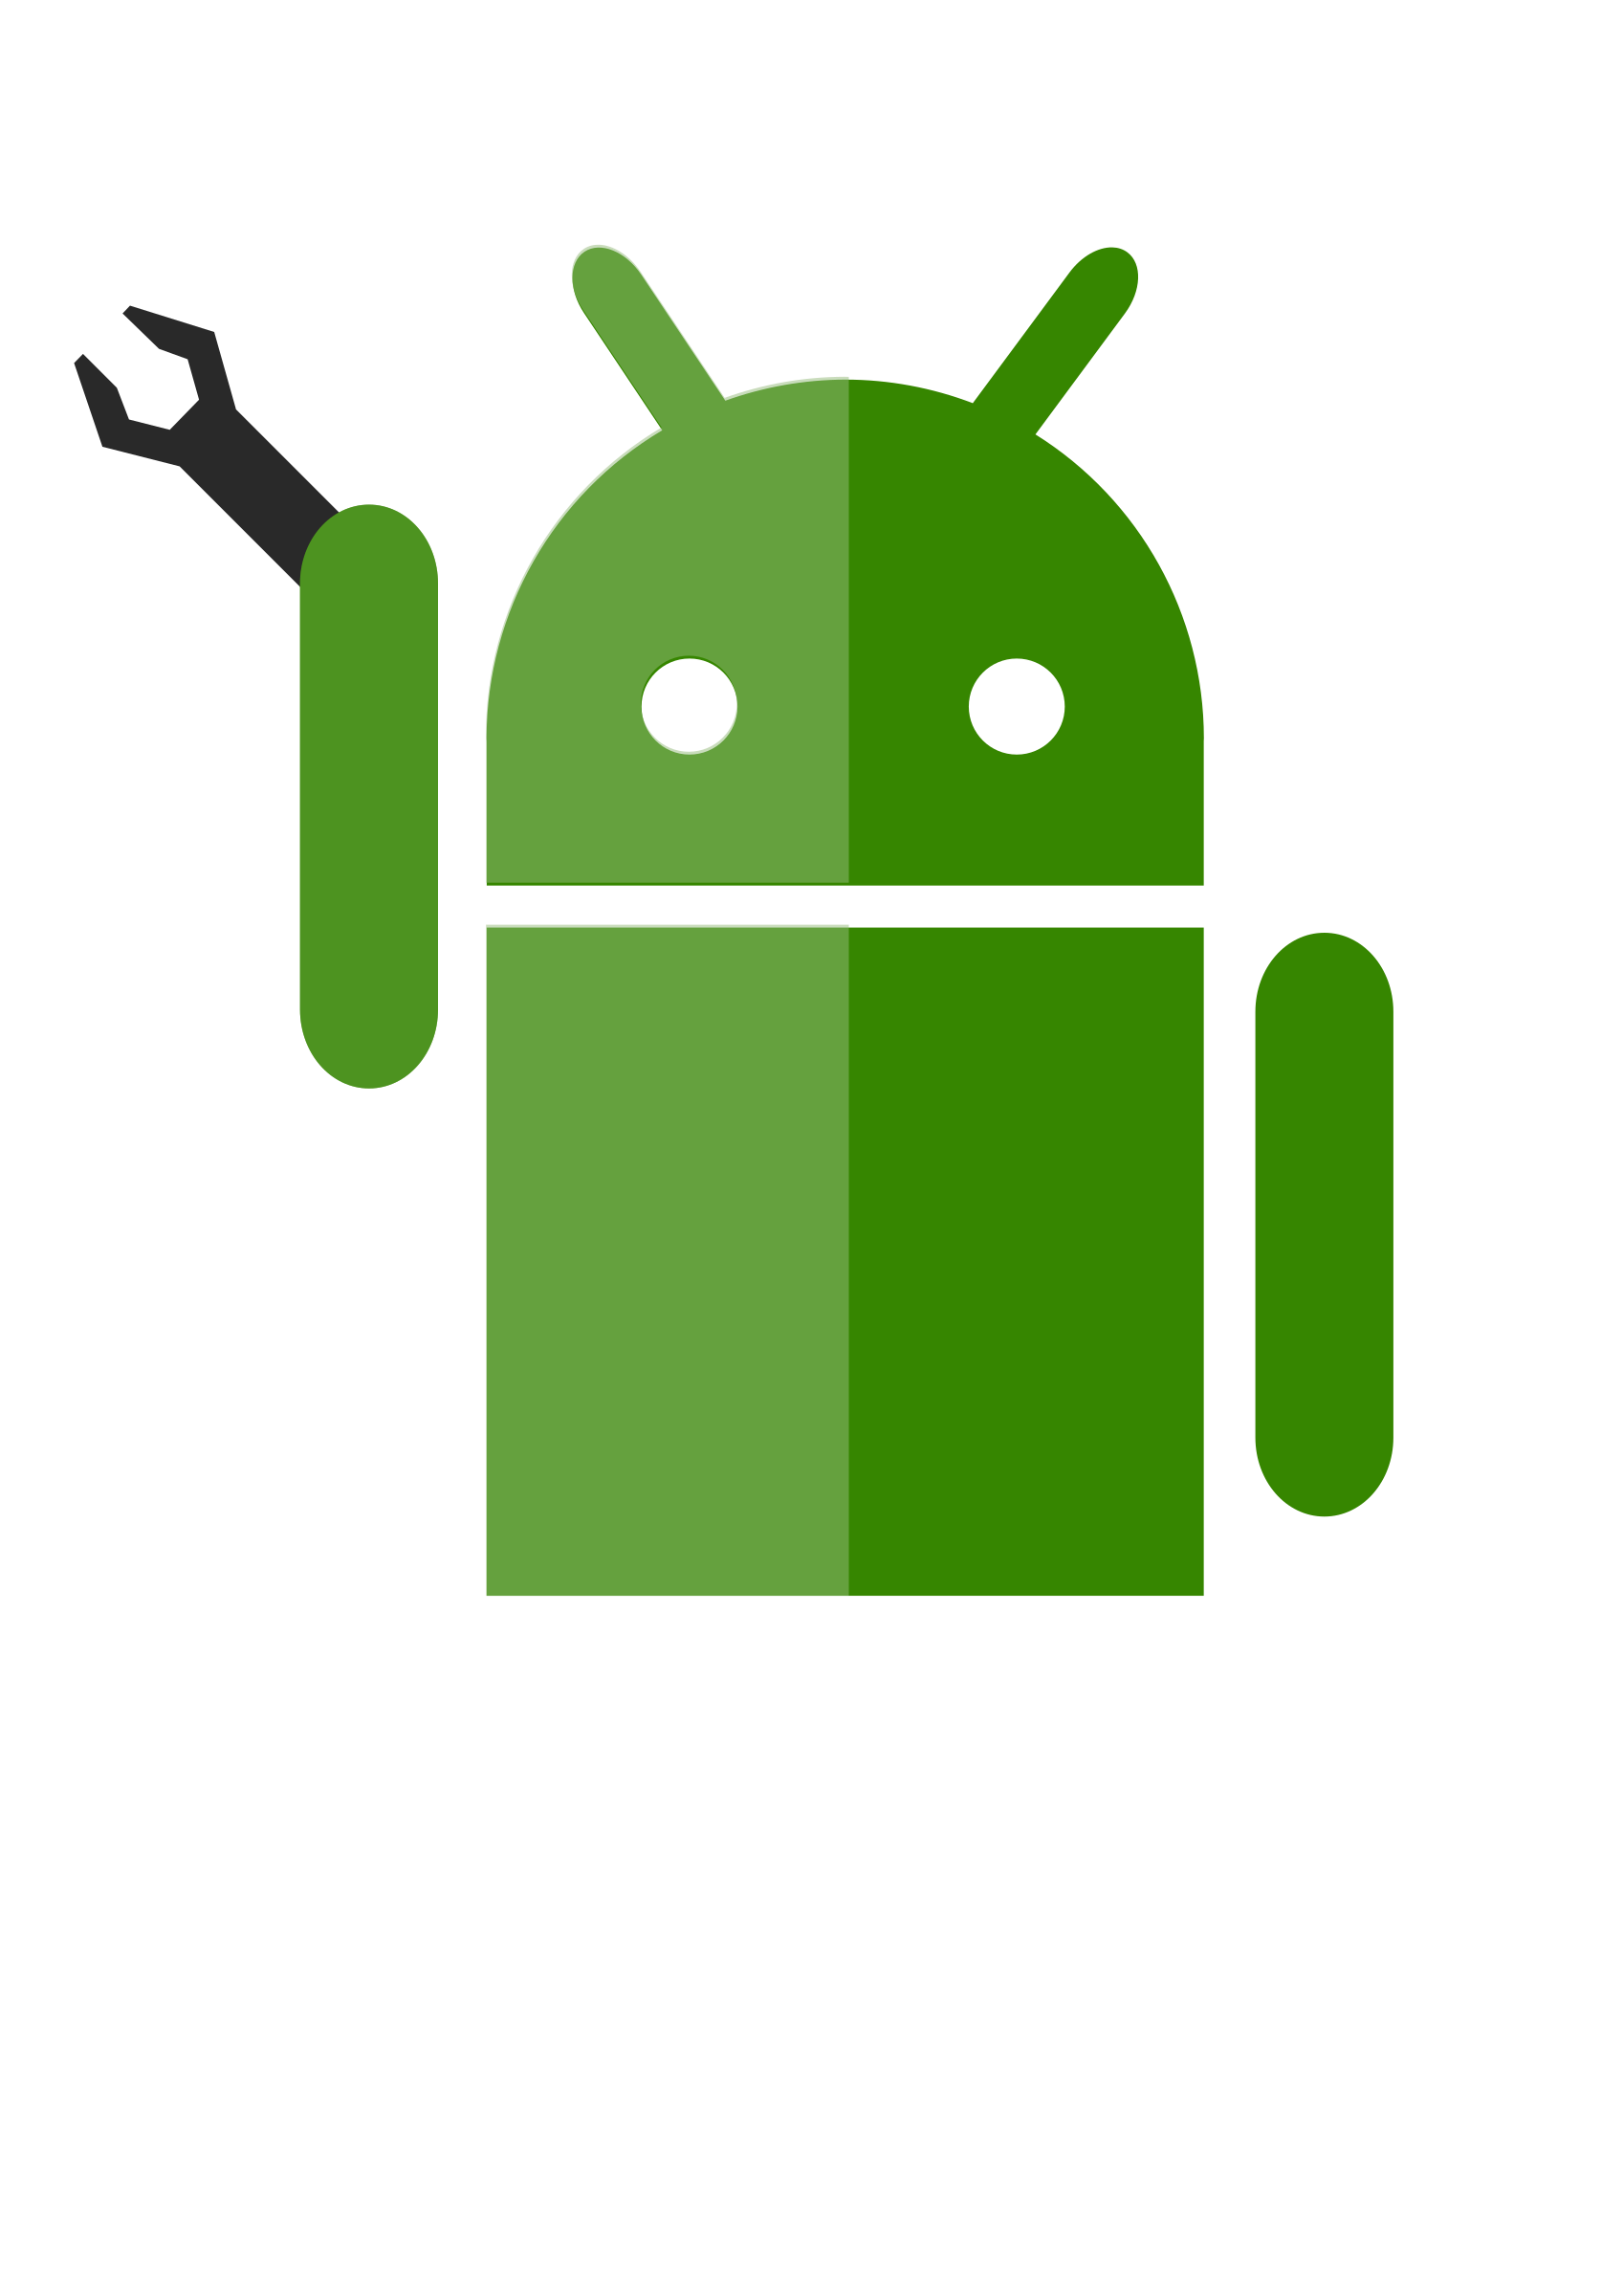 Picture Android Robot Free Transparent Image HQ PNG Image